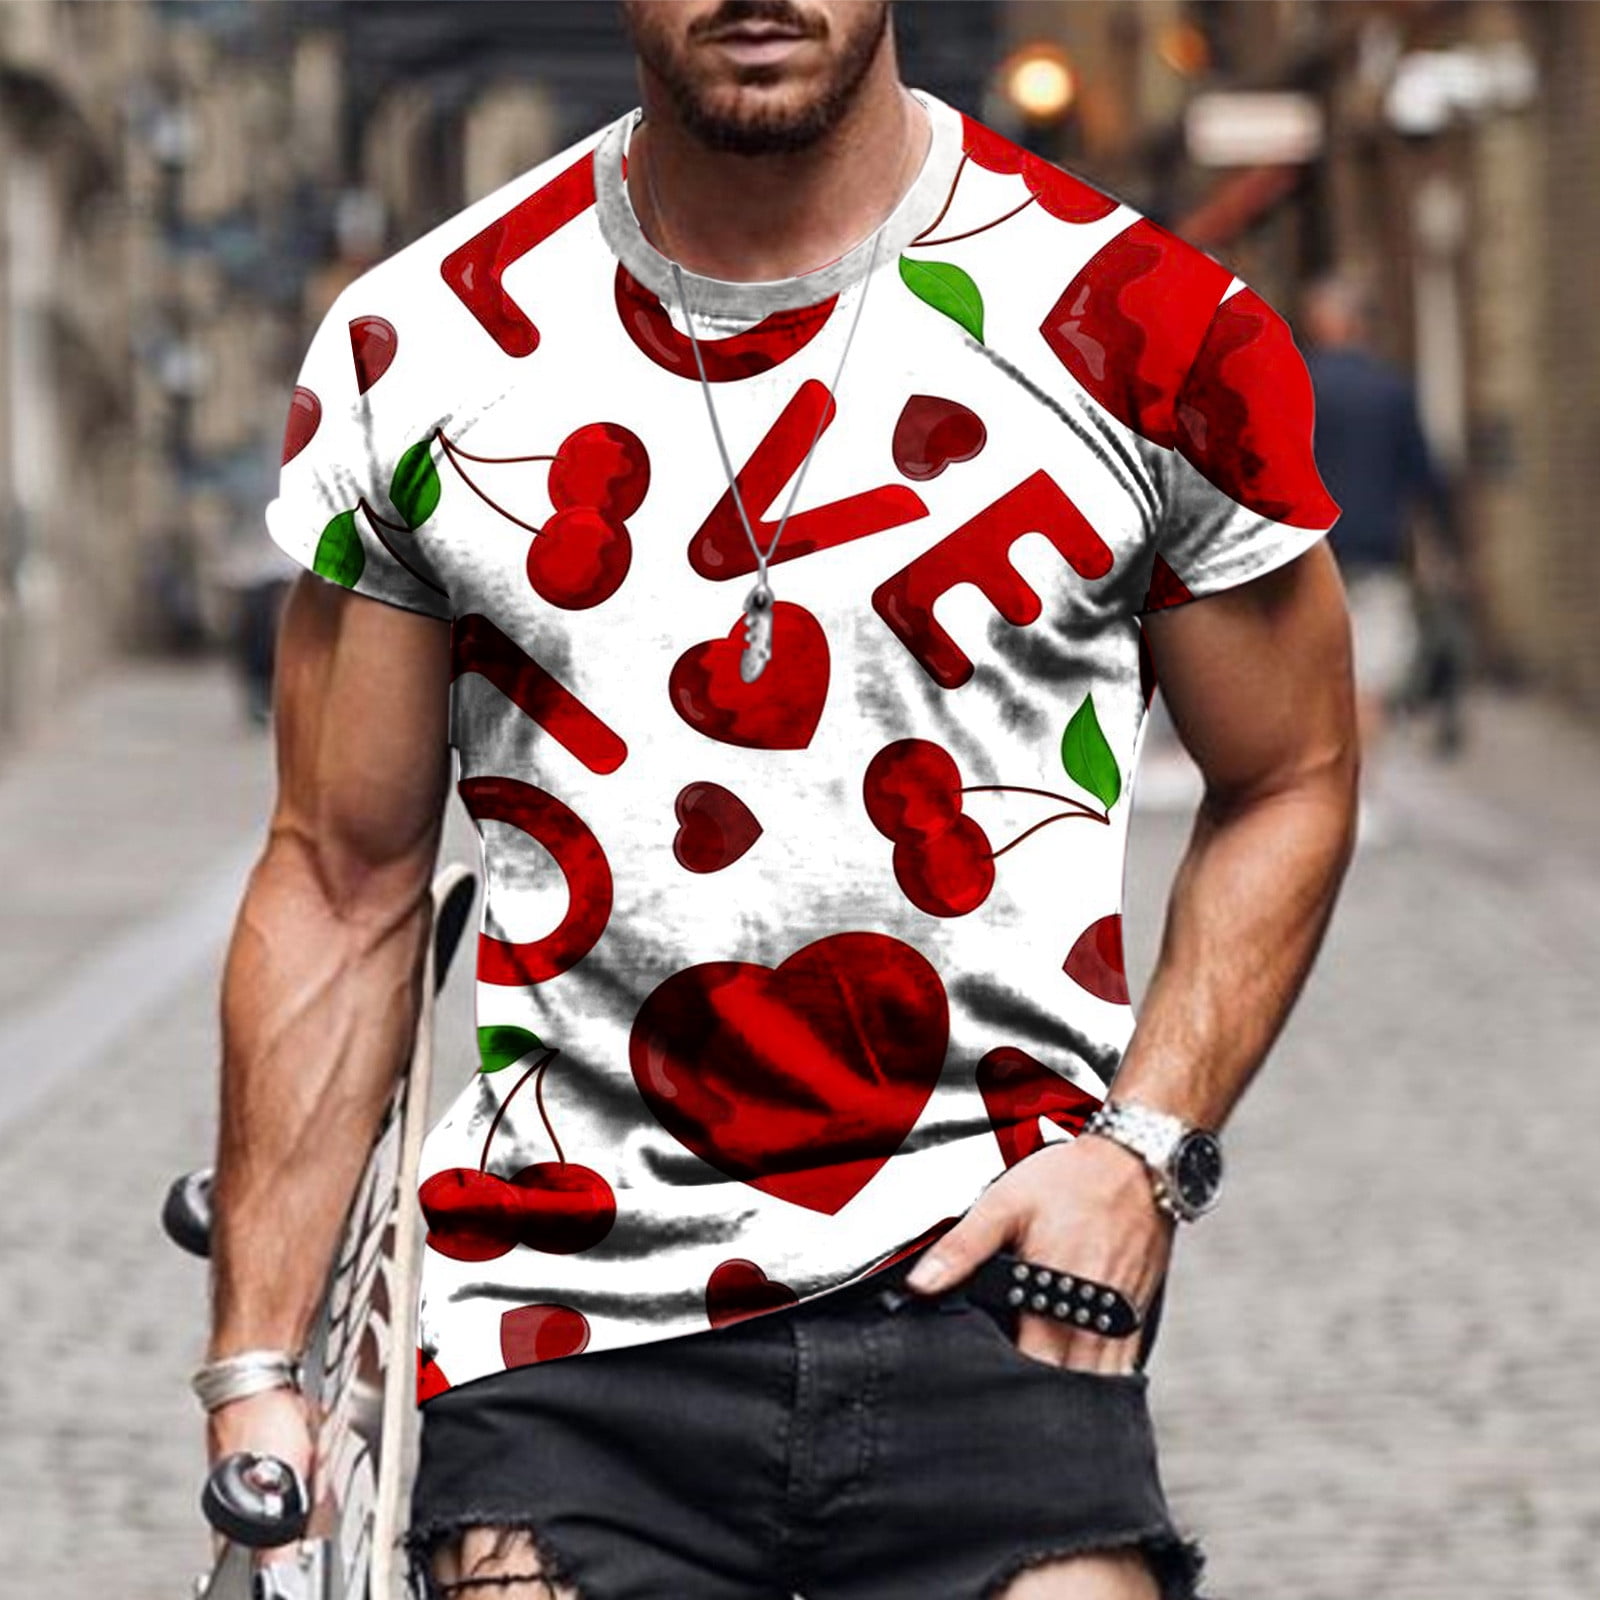 klud Tag et bad amme cllios Short Sleeve Shirts for Men Heart Graphic Tee Big & Tall Casual Crew  Neck Tops Novelty Designer T Shirts for Valentine's Day - Walmart.com